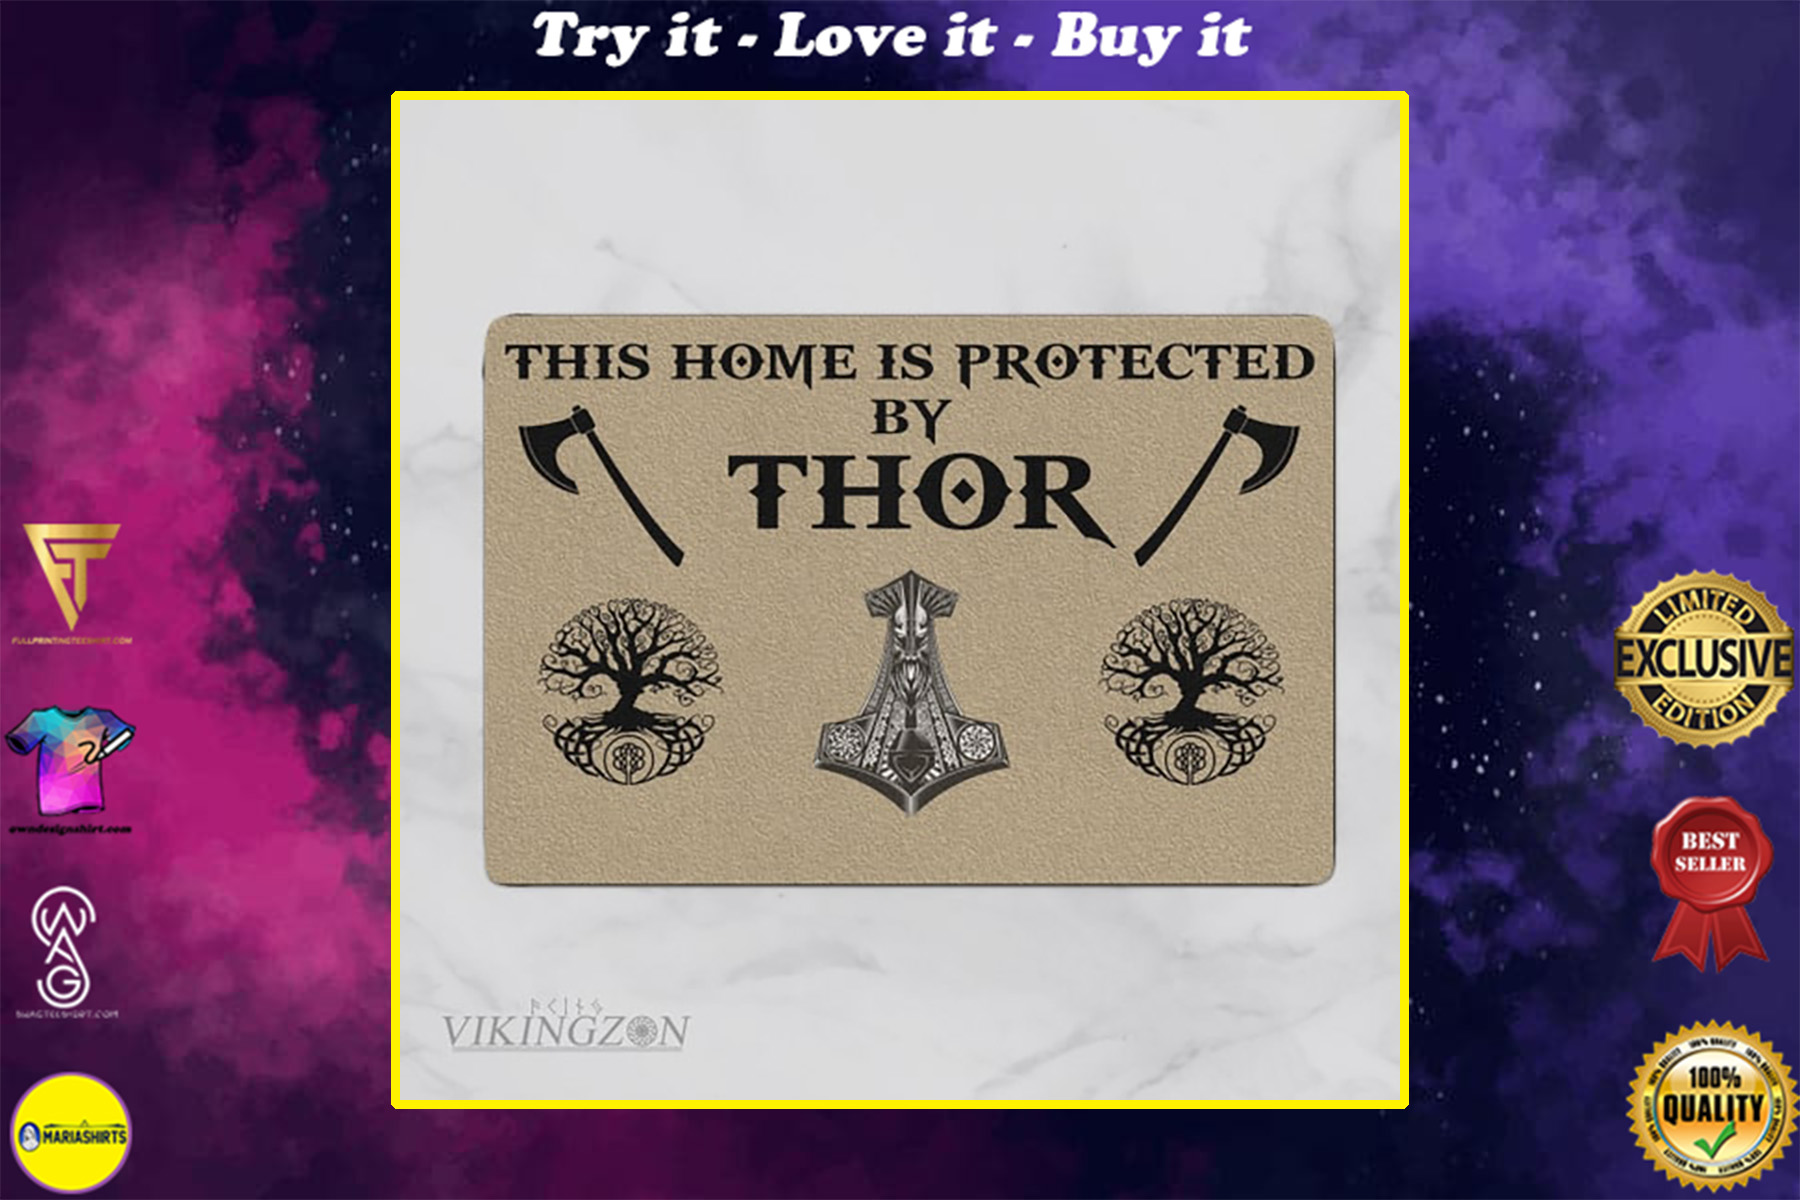 viking this home is protected by thor full printing doormat